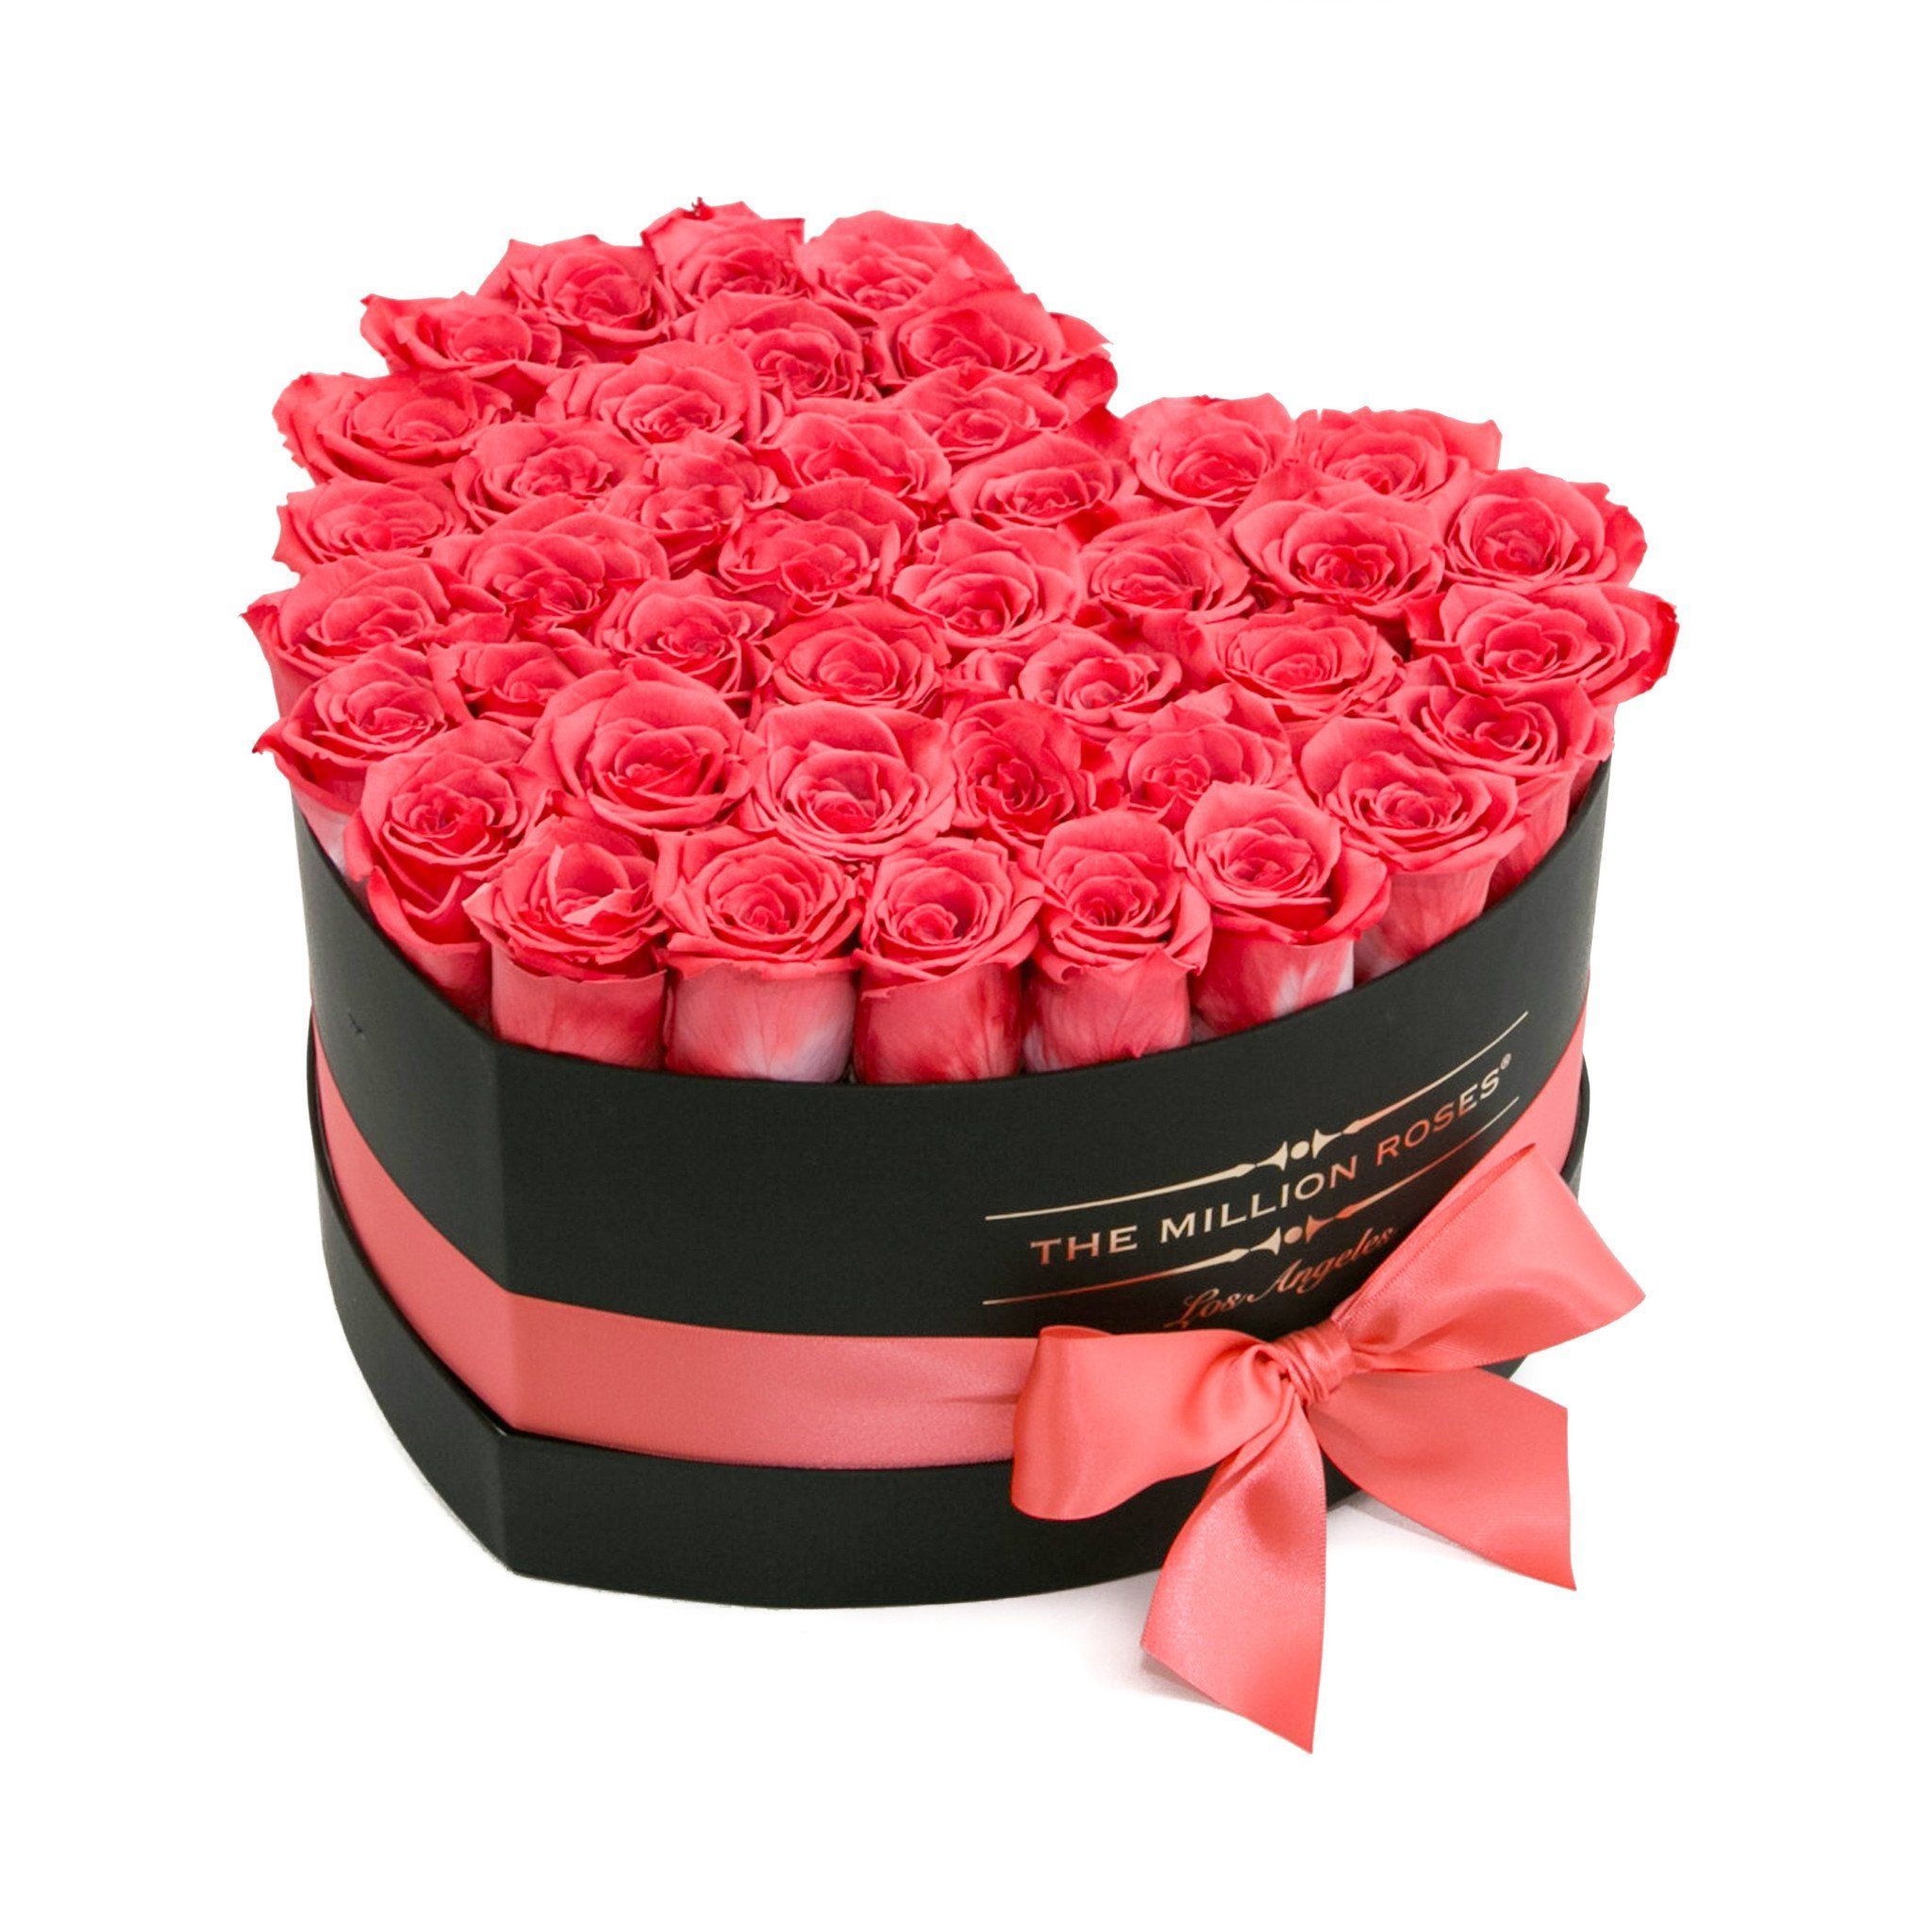 LOVE box - black - coral roses coral eternity roses - the million roses